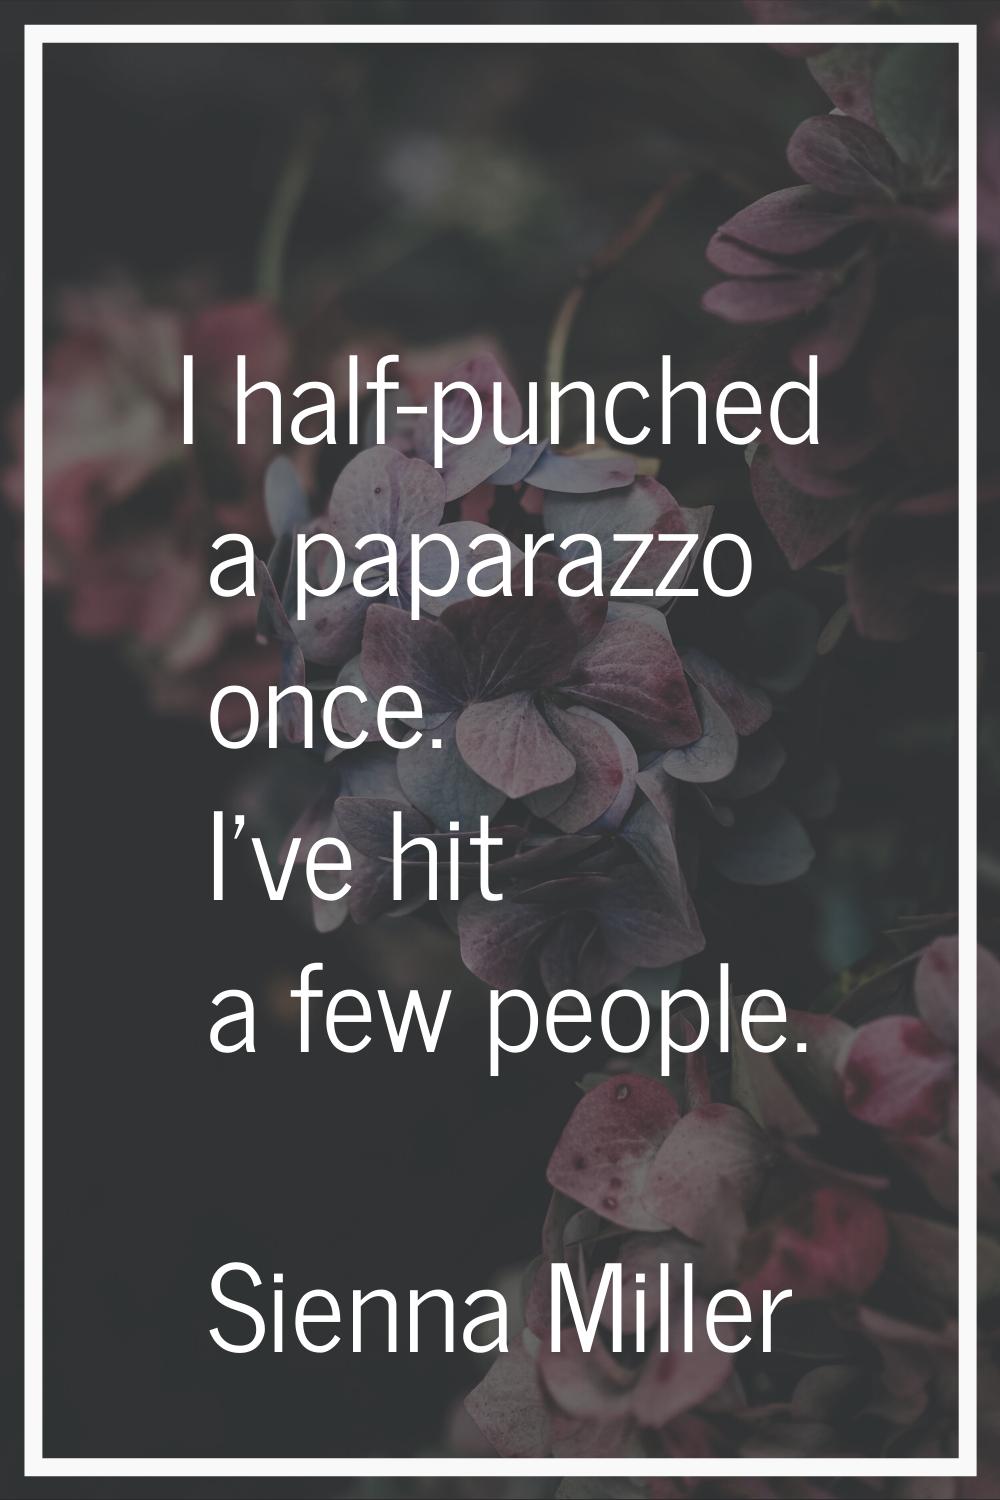 I half-punched a paparazzo once. I've hit a few people.